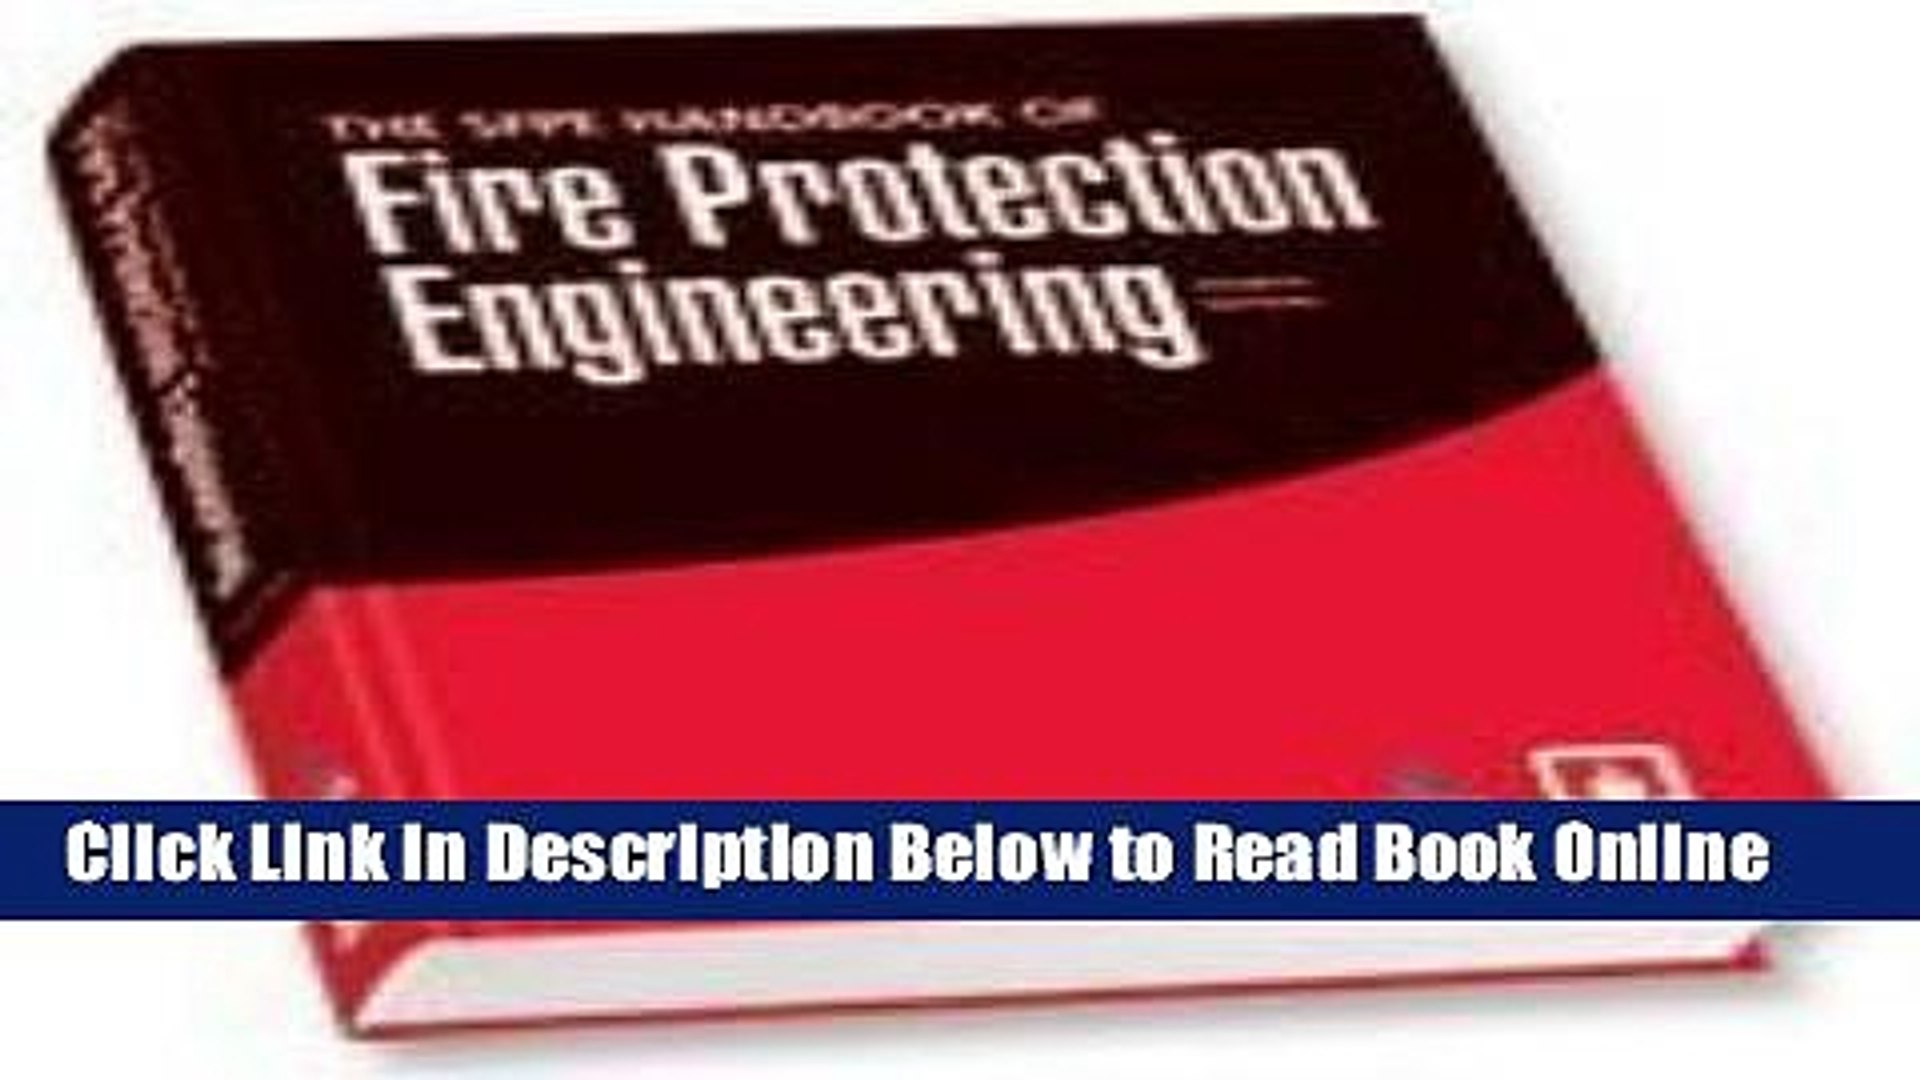 Sfpe Handbook Of Fire Protection Engineering Free Download renewman